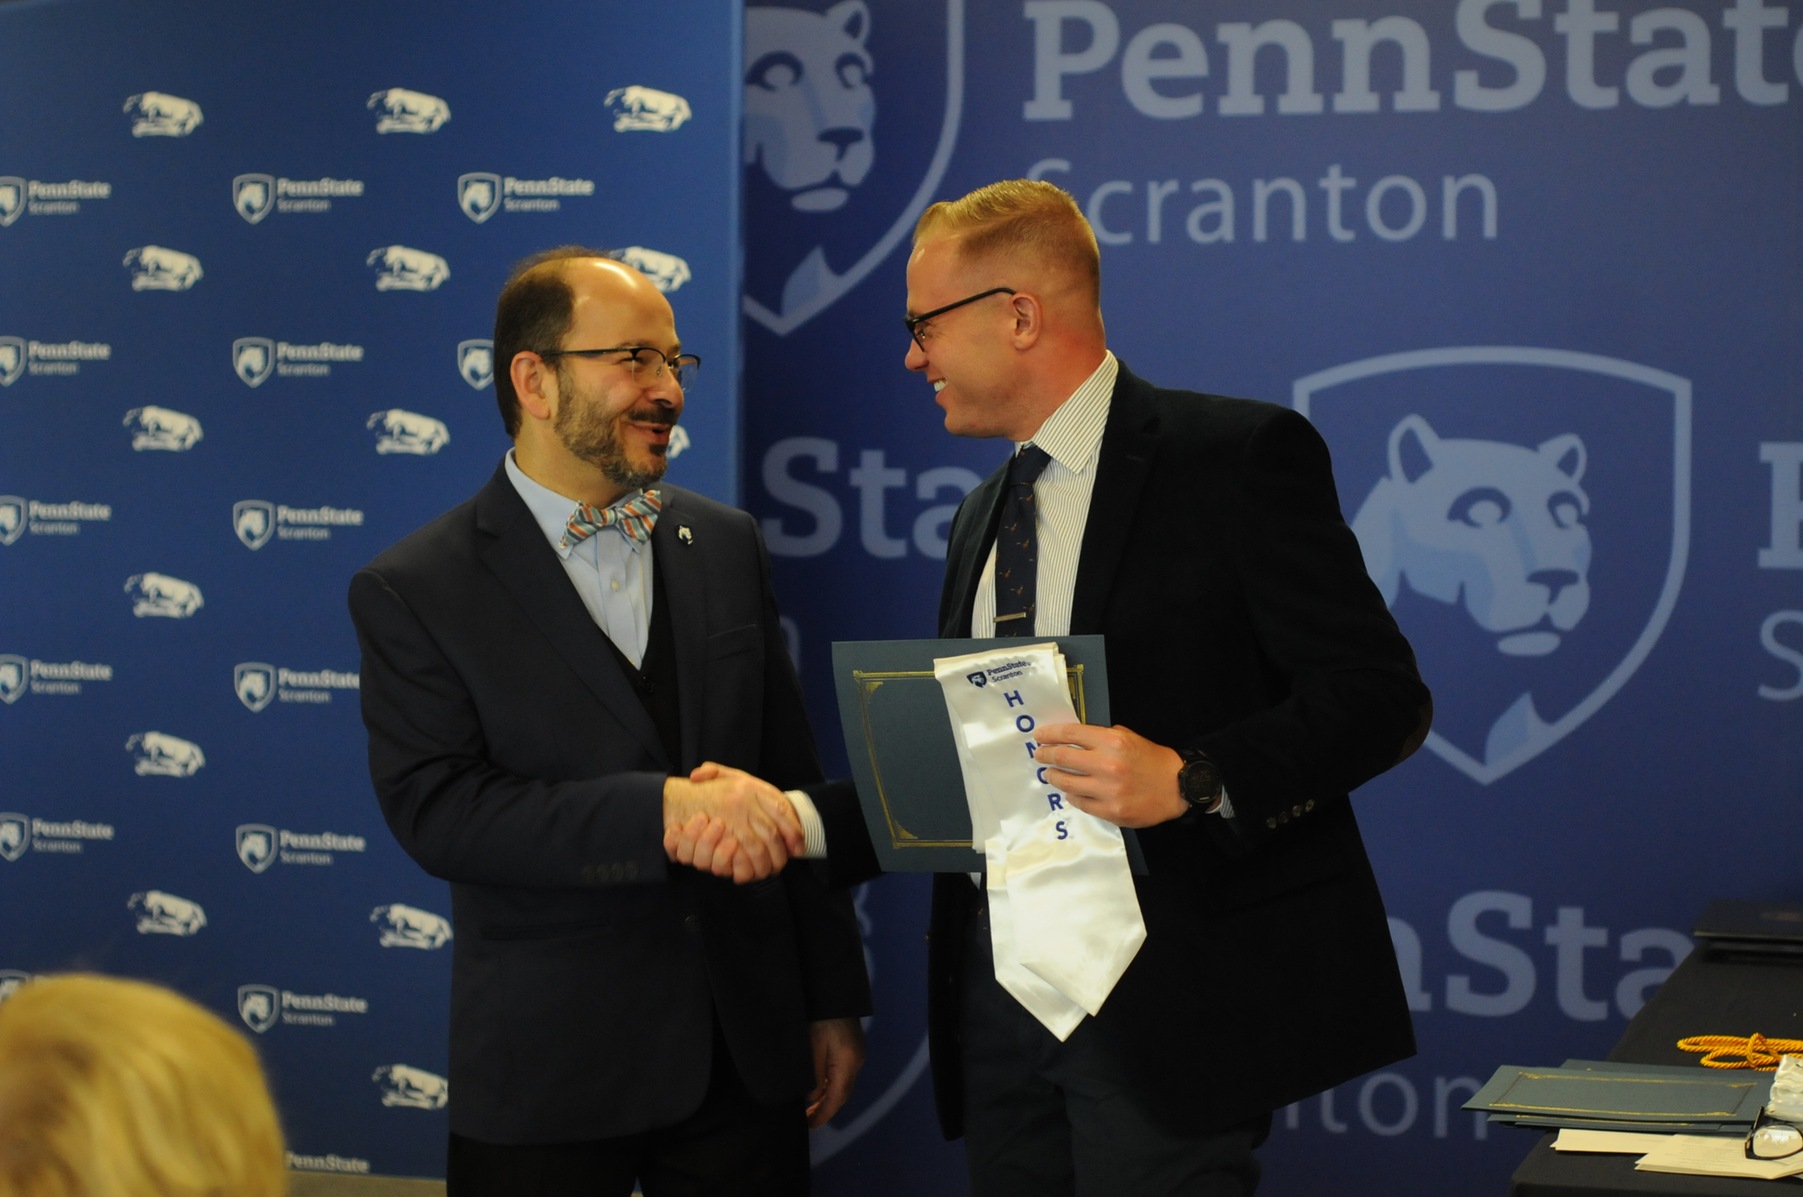 Kyle Franceski (senior- men's cross country) shakes hands with Dr. Wafa, Penn State Scranton's Chancellor, while receiving his second year Honors Certificate.